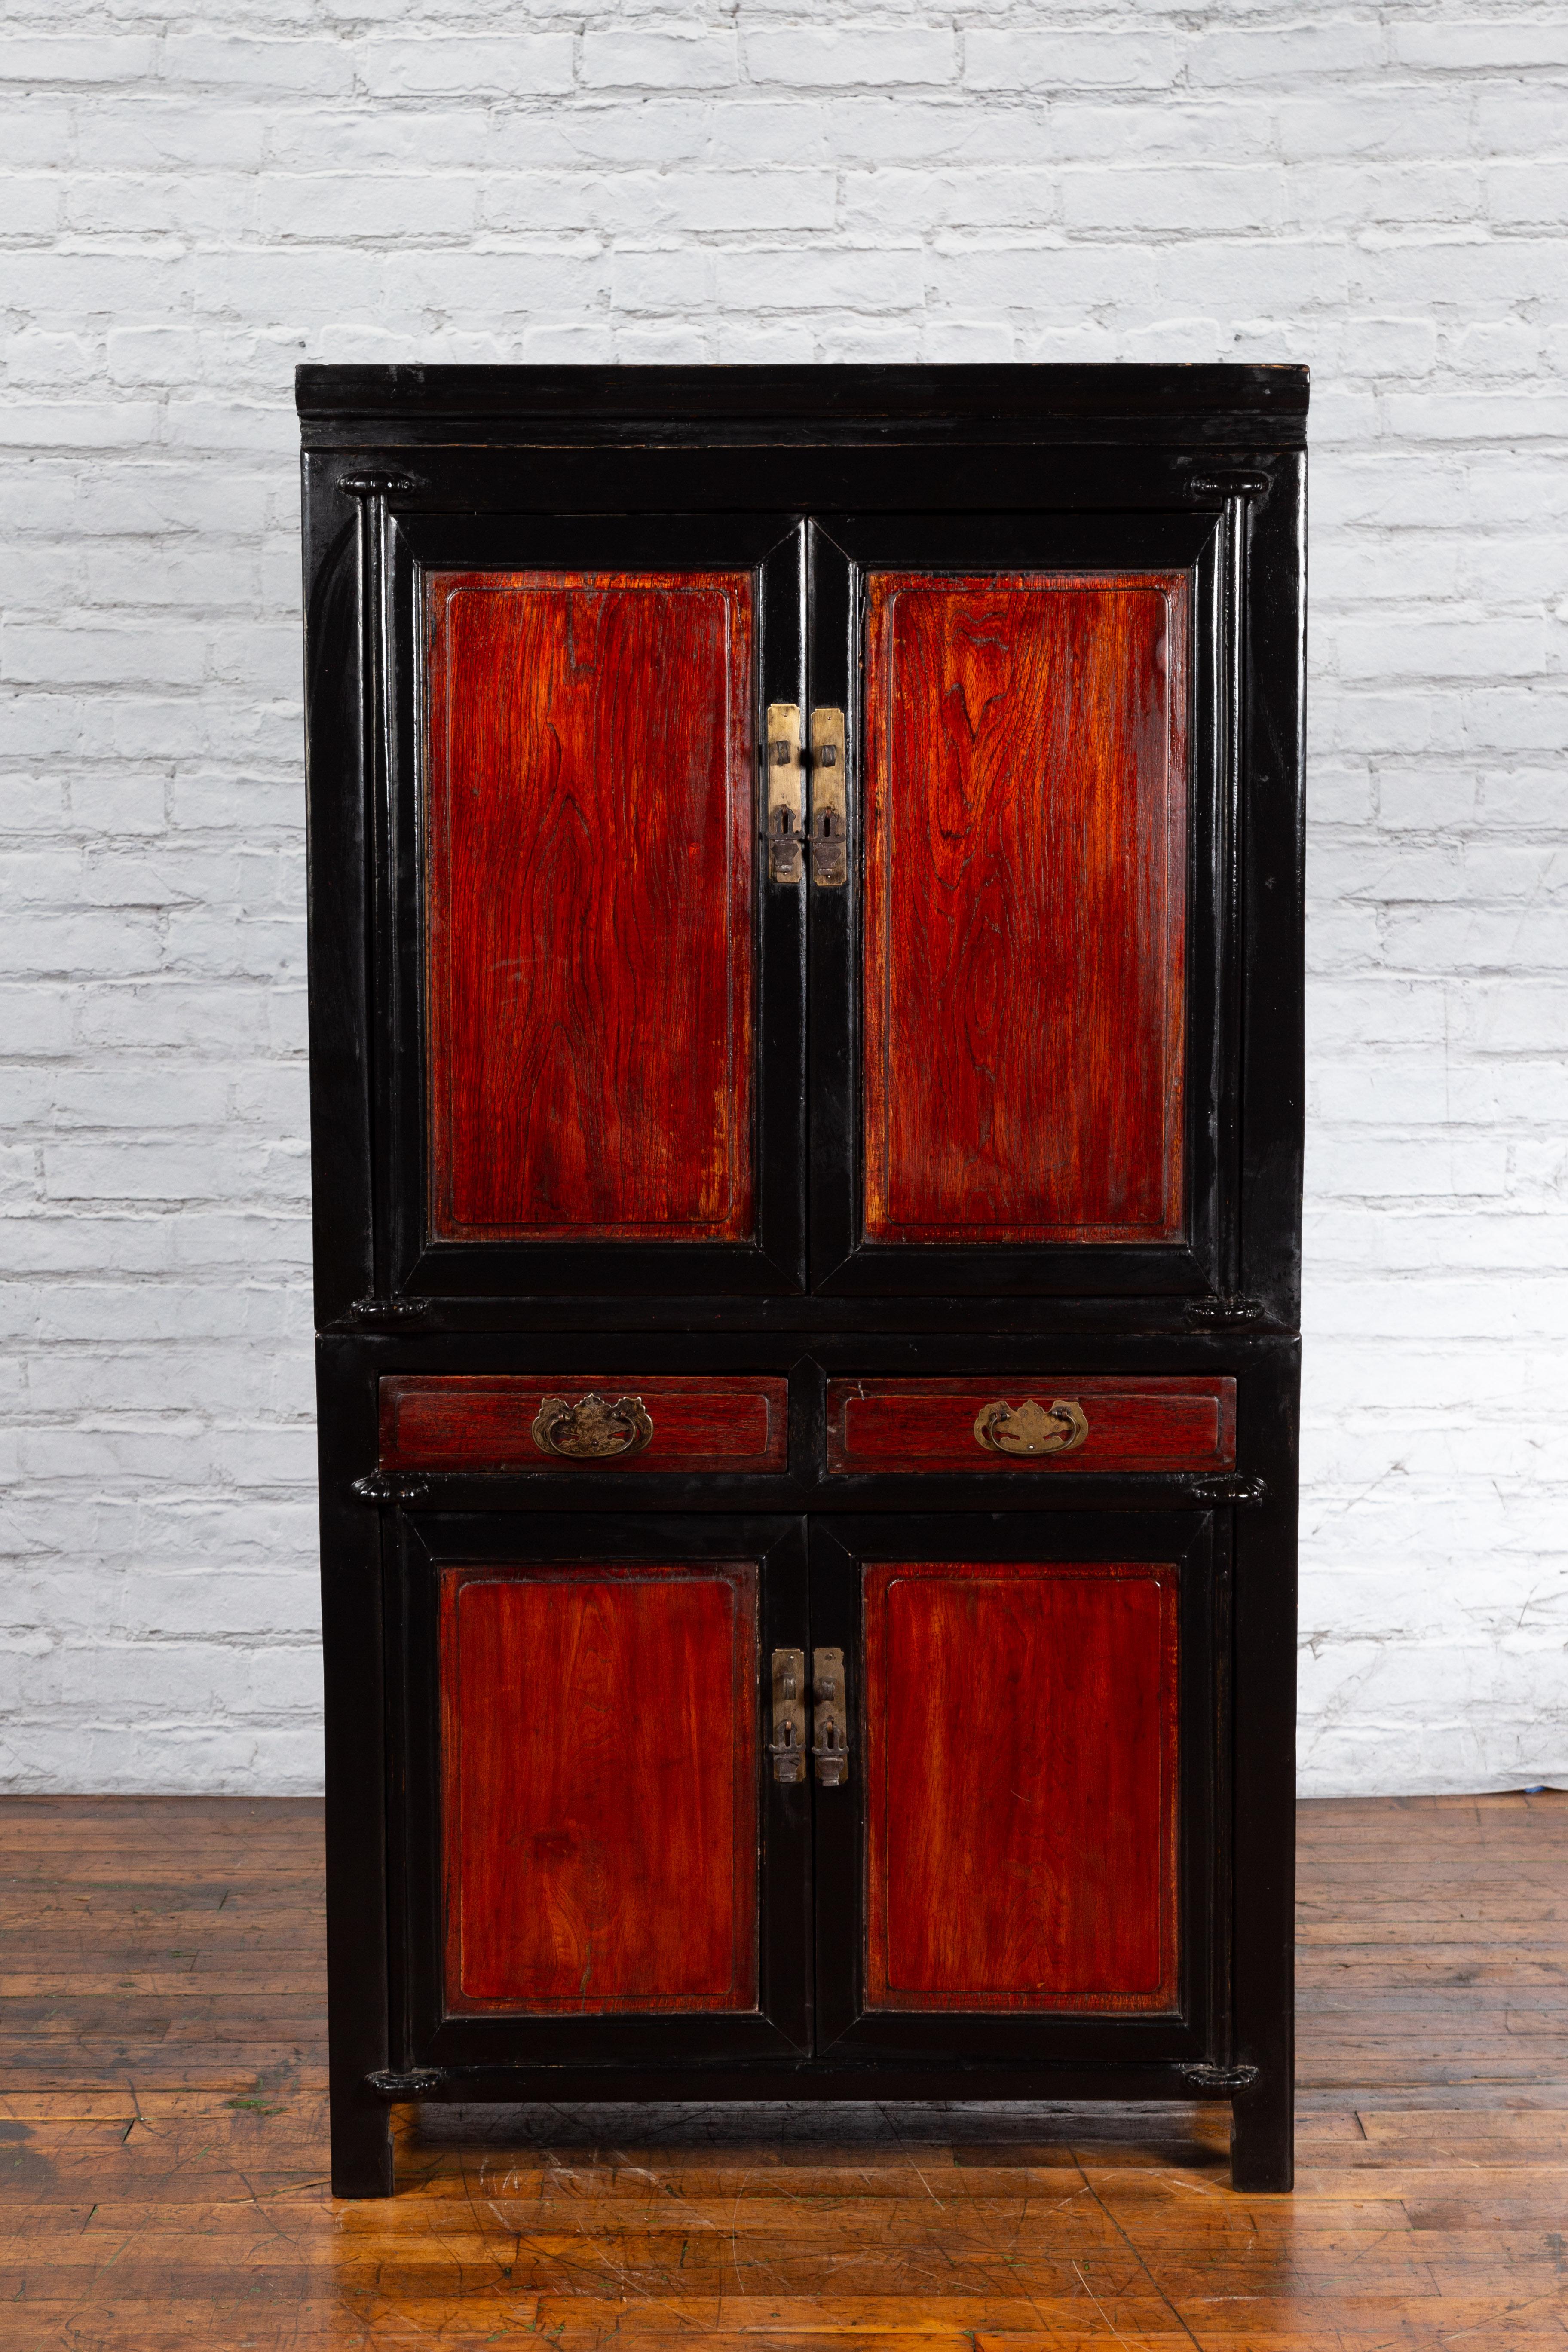 A Chinese black and brown lacquered cabinet from the early 20th century, with with brass hardware, four doors and drawers. Created in China during the early years of the 20th century, this cabinet features a linear silhouette made of a black body